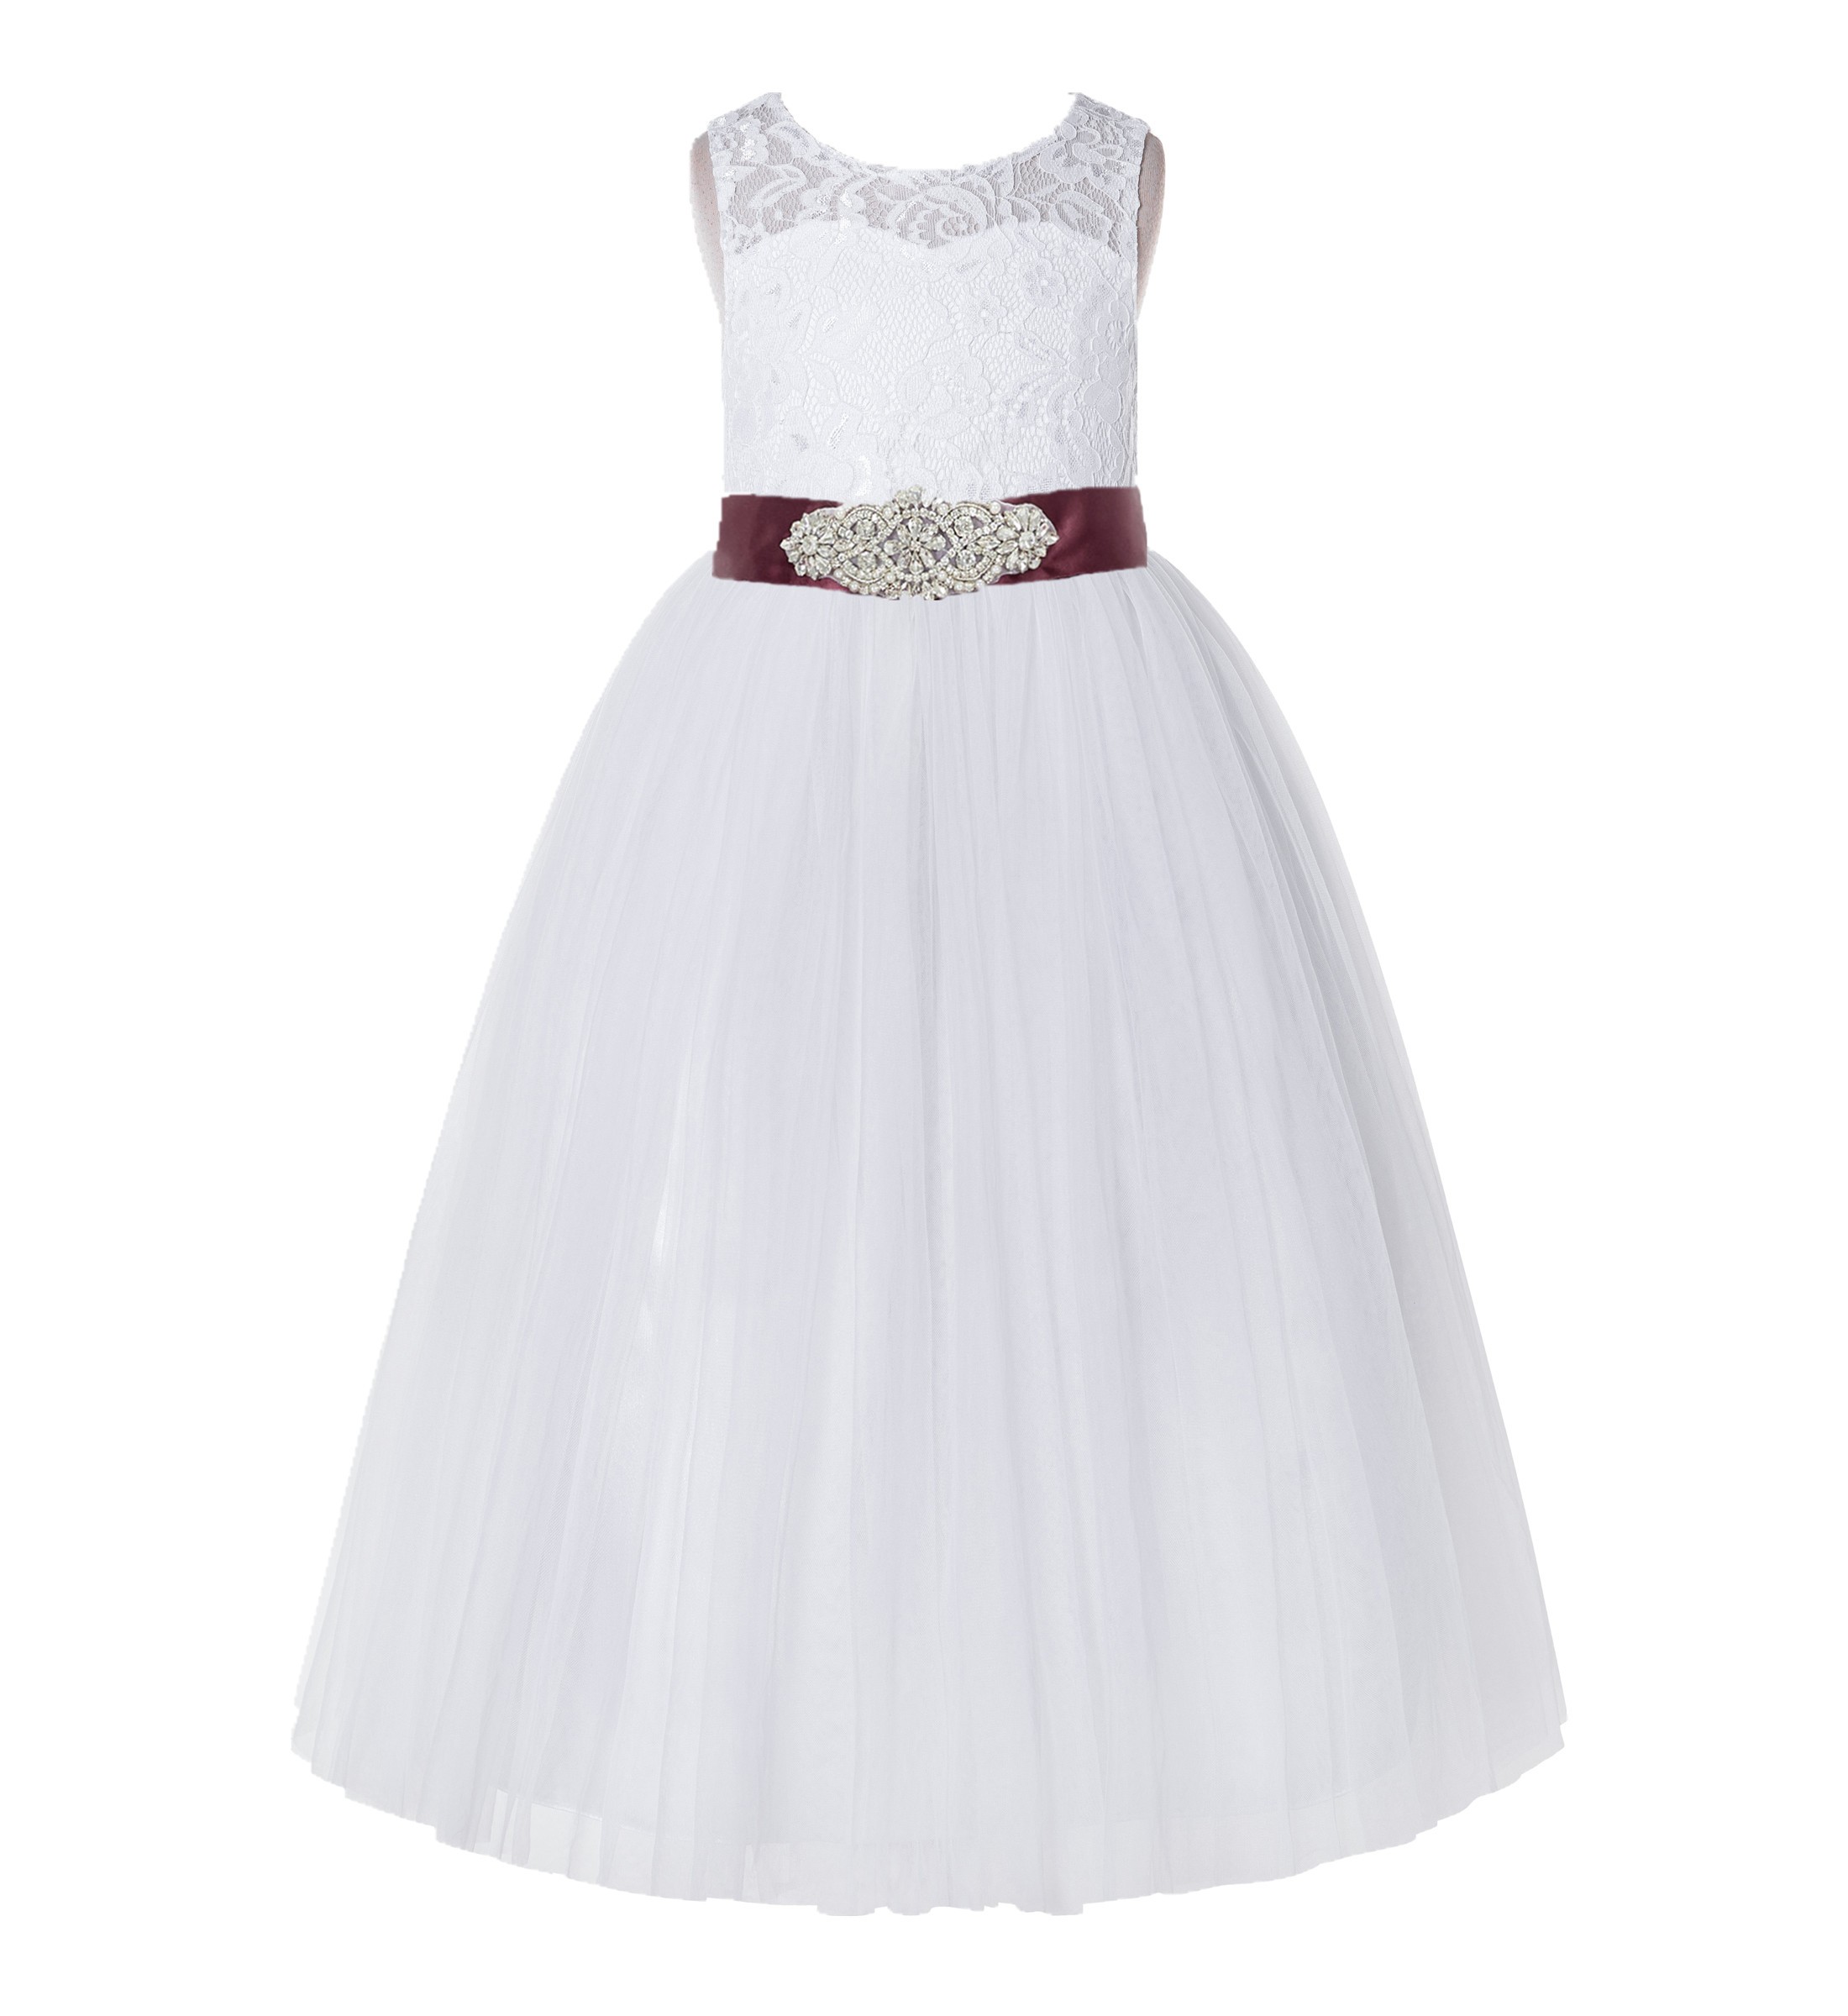 White / Burgundy Tulle A-Line Lace Flower Girl Dress 178R3